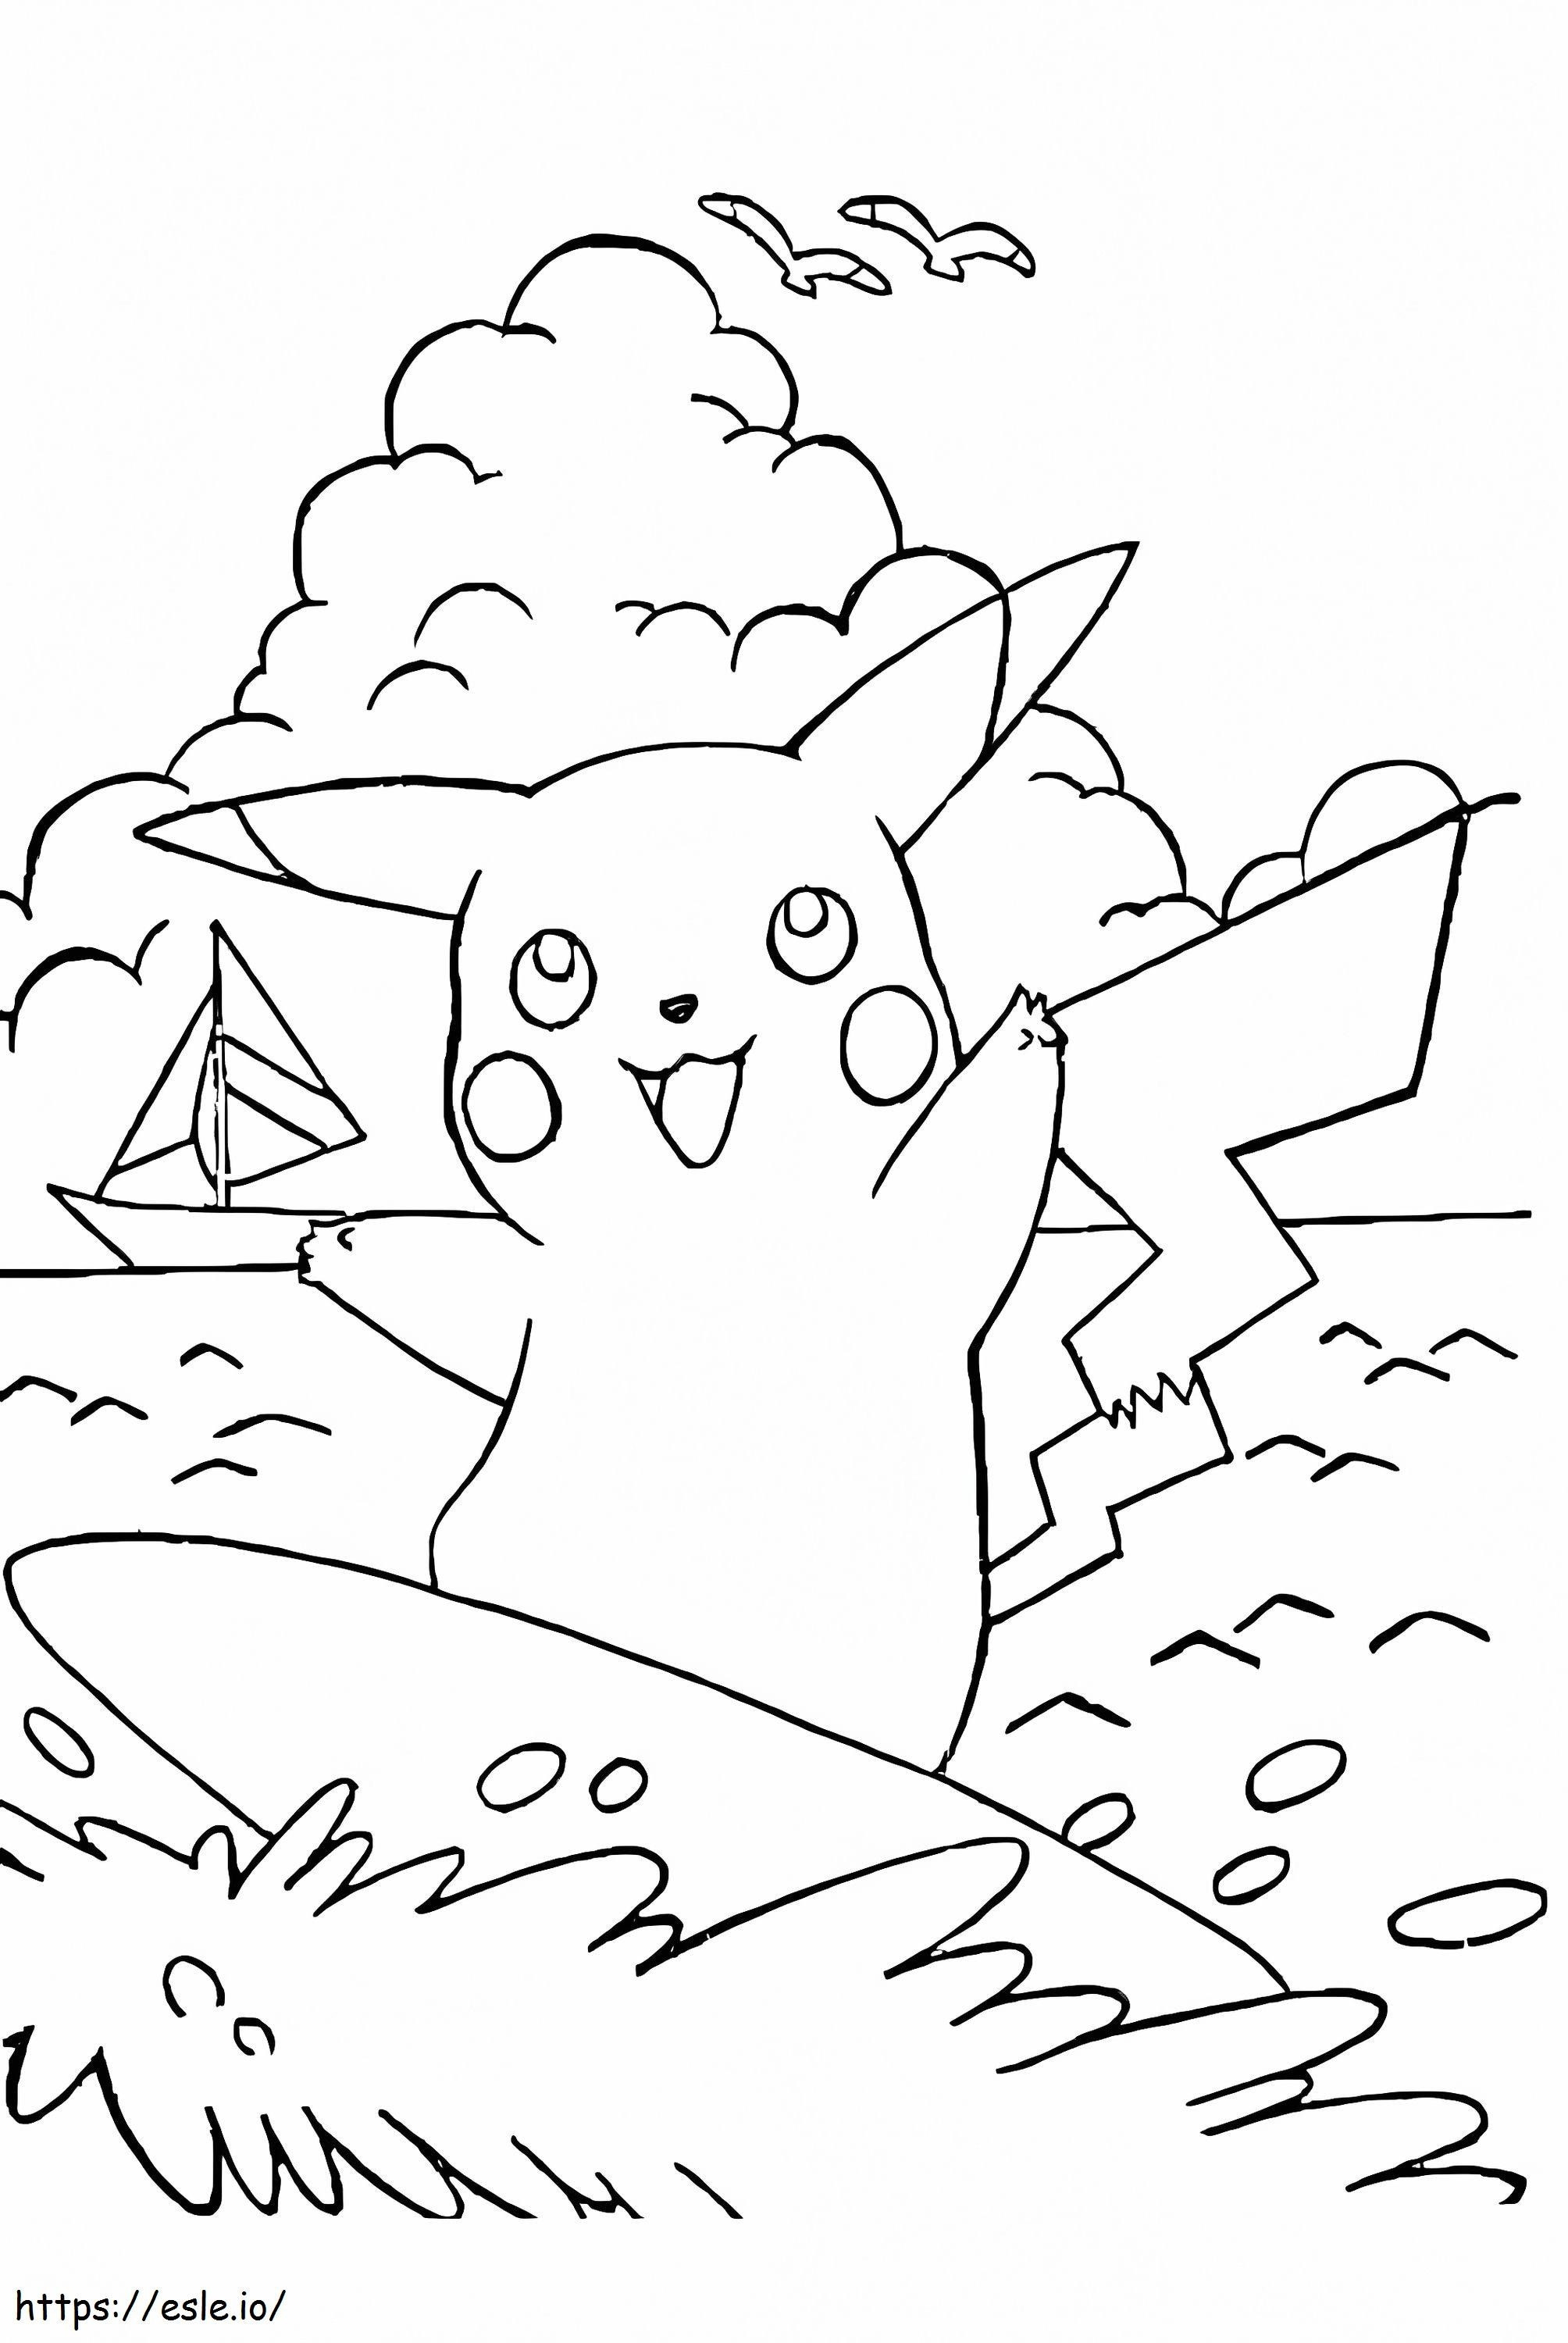 Pikachu On Surfboard coloring page